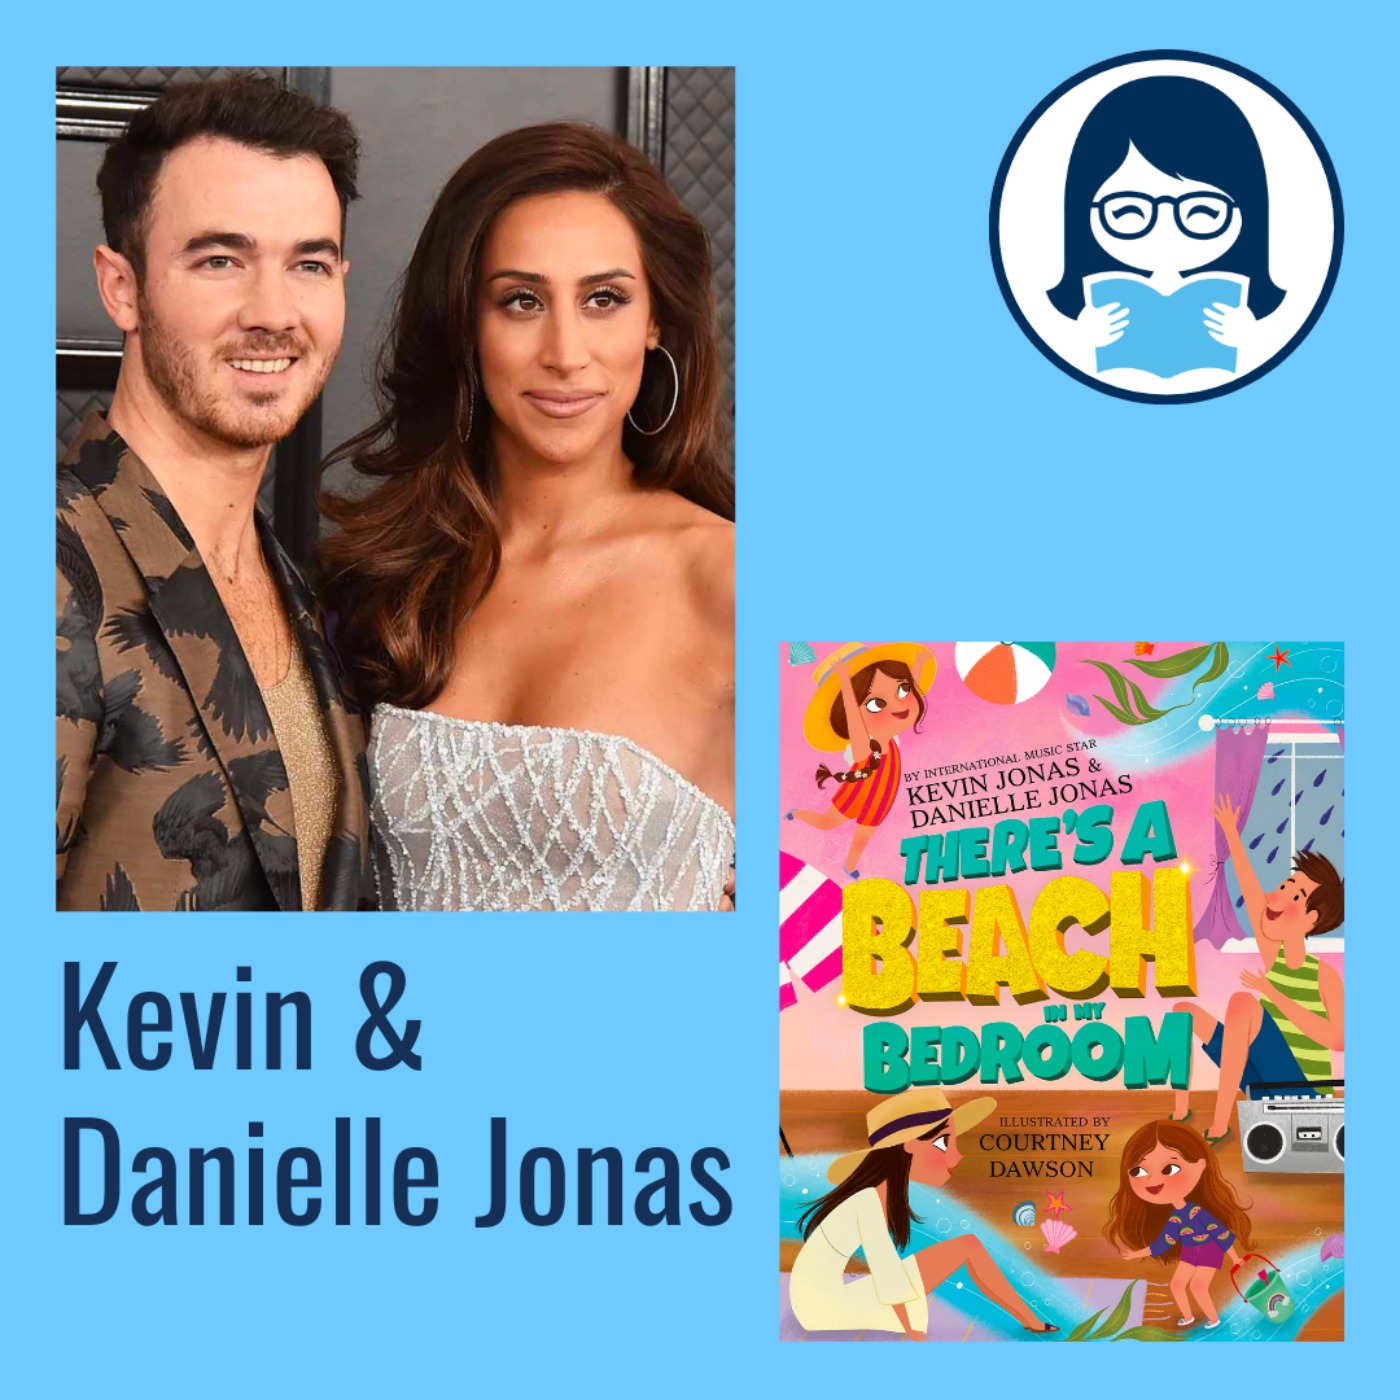 Kevin and Danielle Jonas, THERE'S A BEACH IN MY BEDROOM